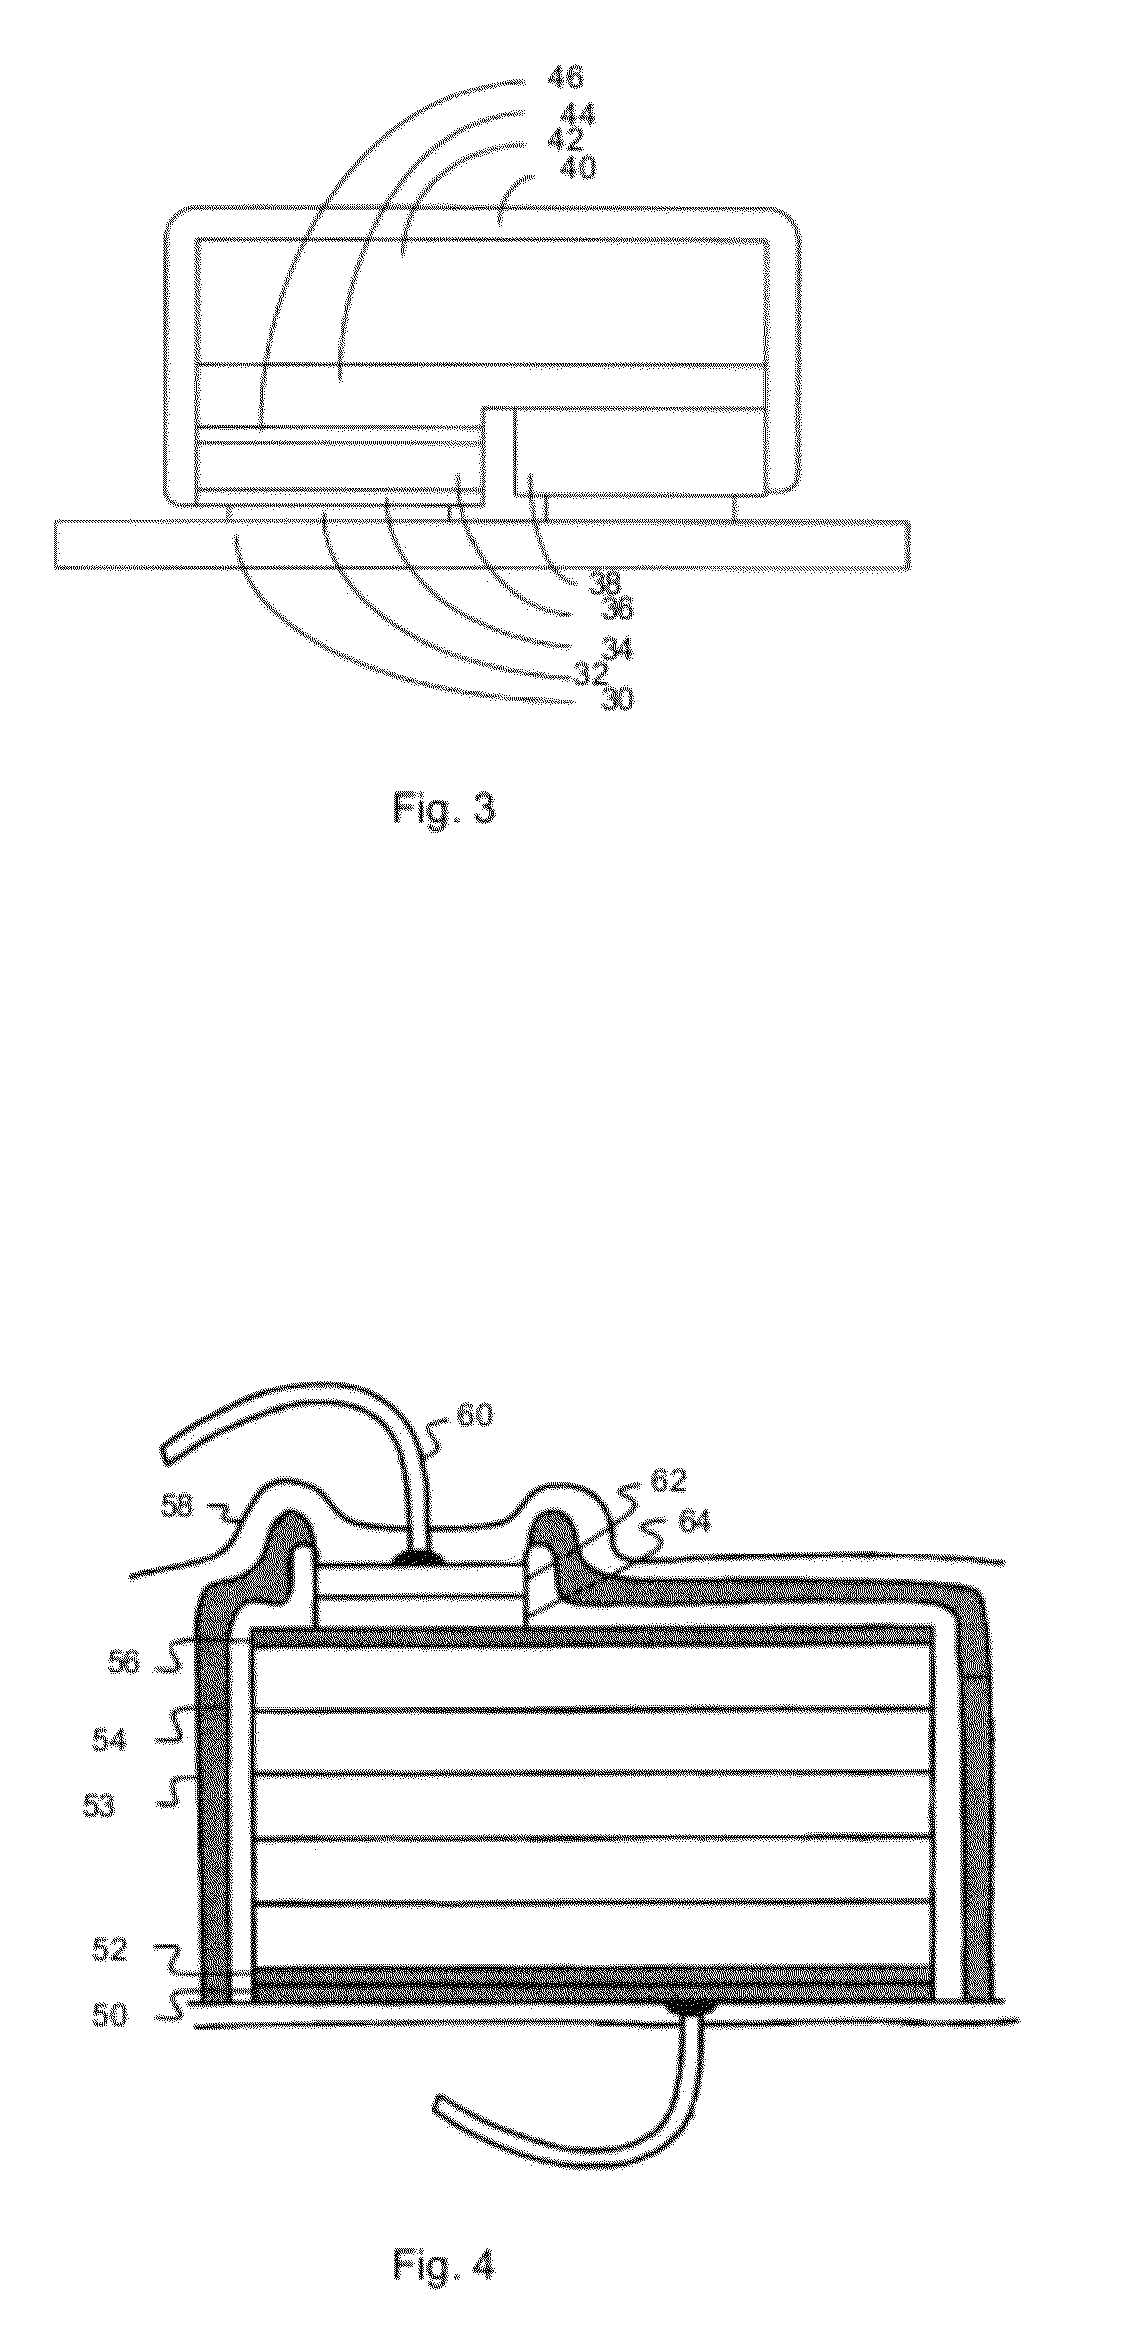 Vertical light emitting diodes (LED) having metal substrate and spin coated phosphor layer for producing white light